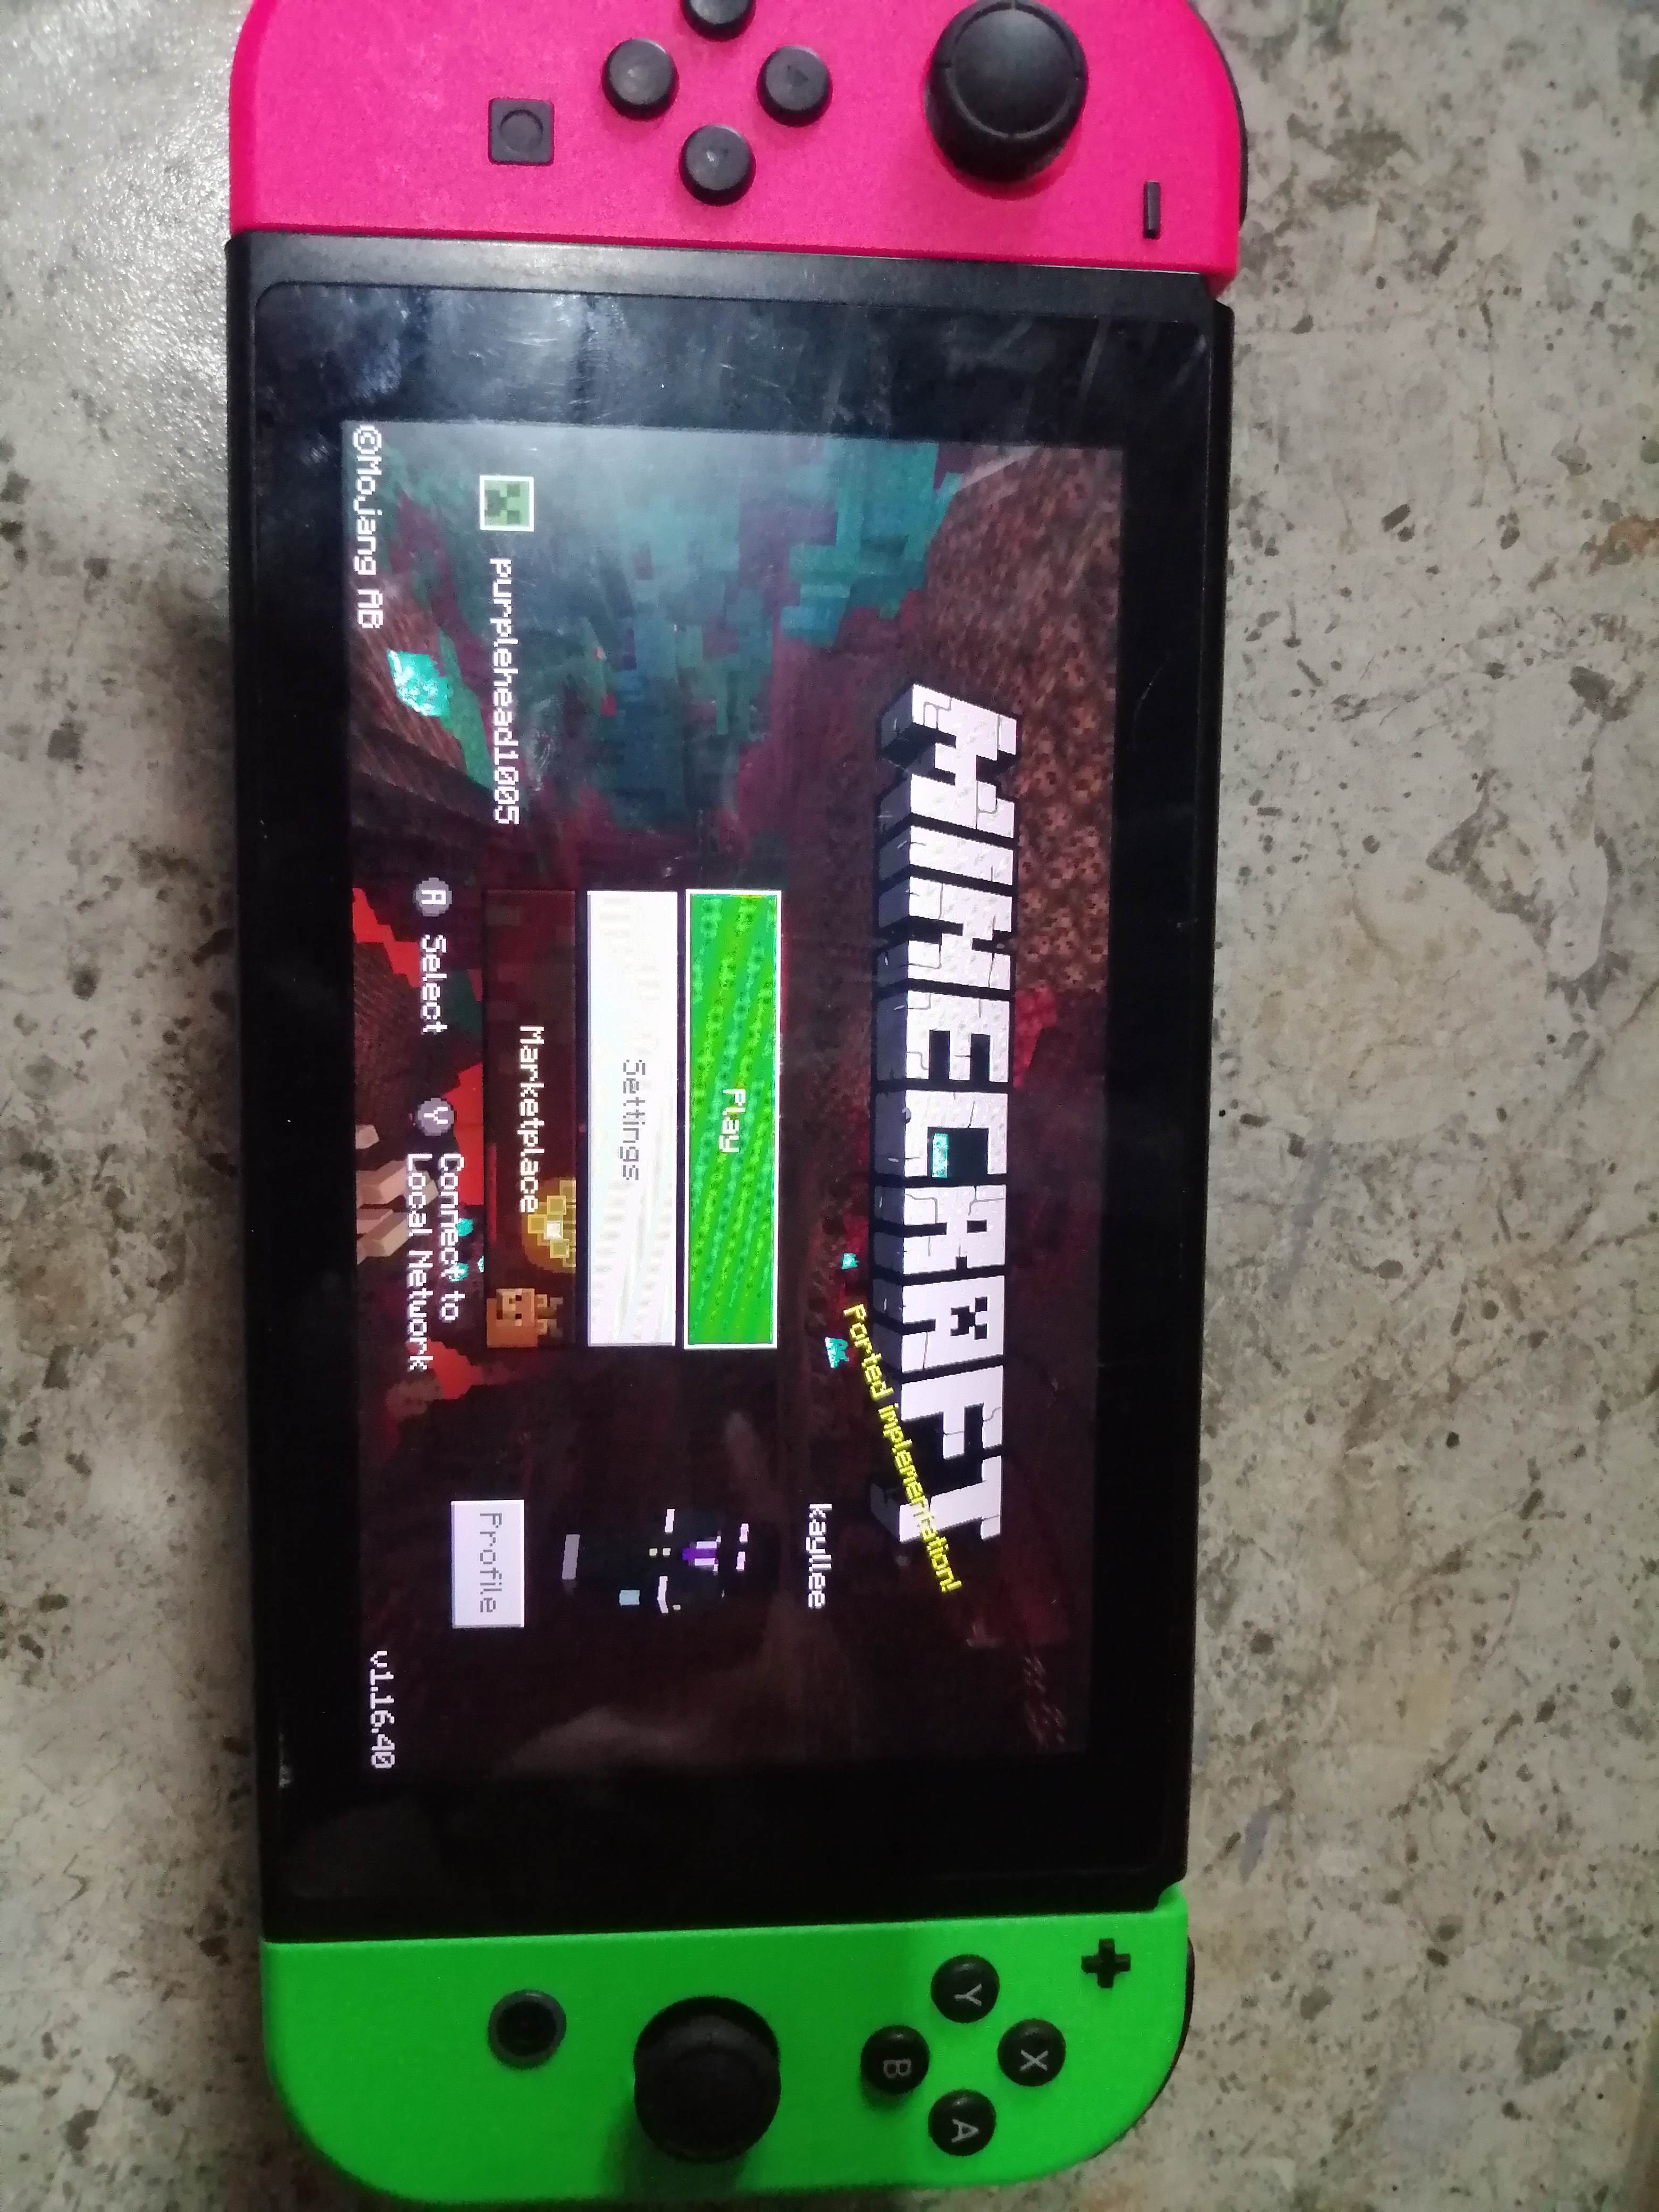 minecraft game card for nintendo switch